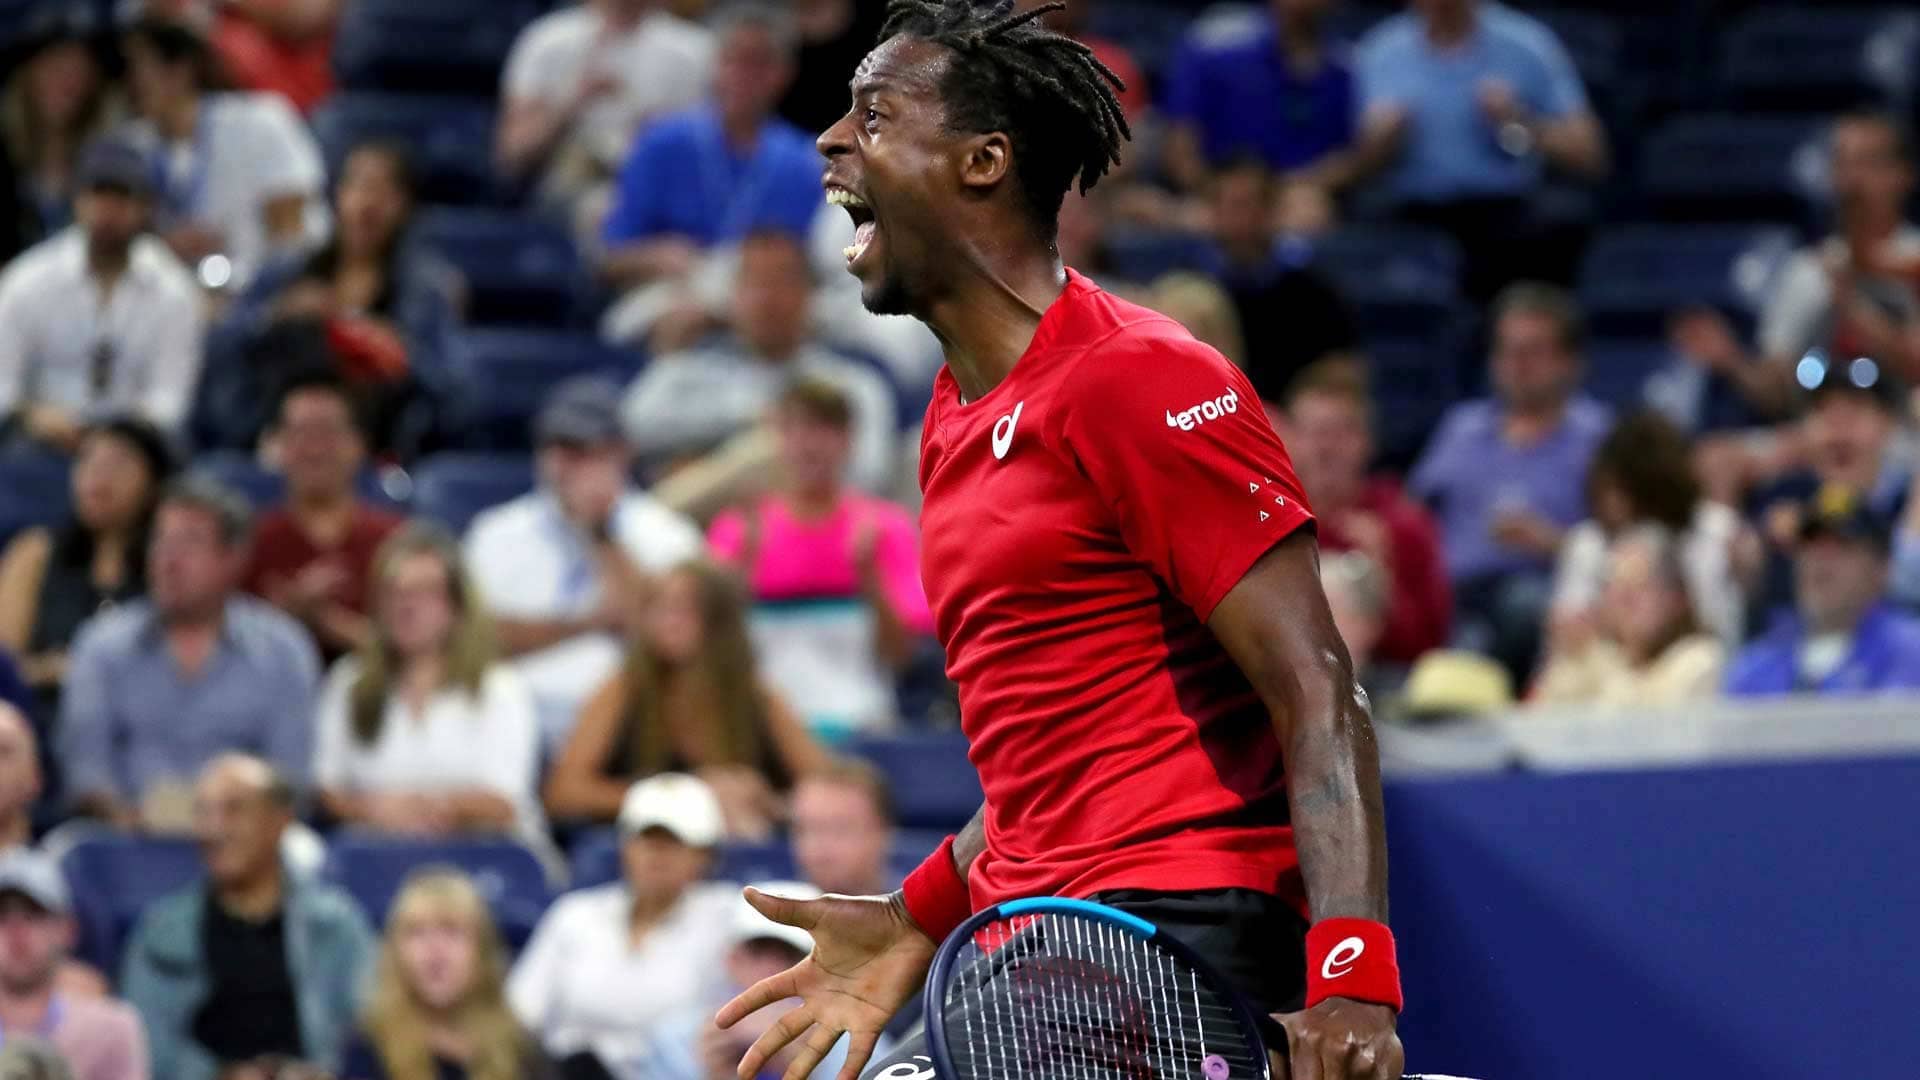 <a href='https://www.atptour.com/en/players/gael-monfils/mc65/overview'>Gael Monfils</a> reacts in his third-round match at the 2019 <a href='https://www.atptour.com/en/tournaments/us-open/560/overview'>US Open</a>